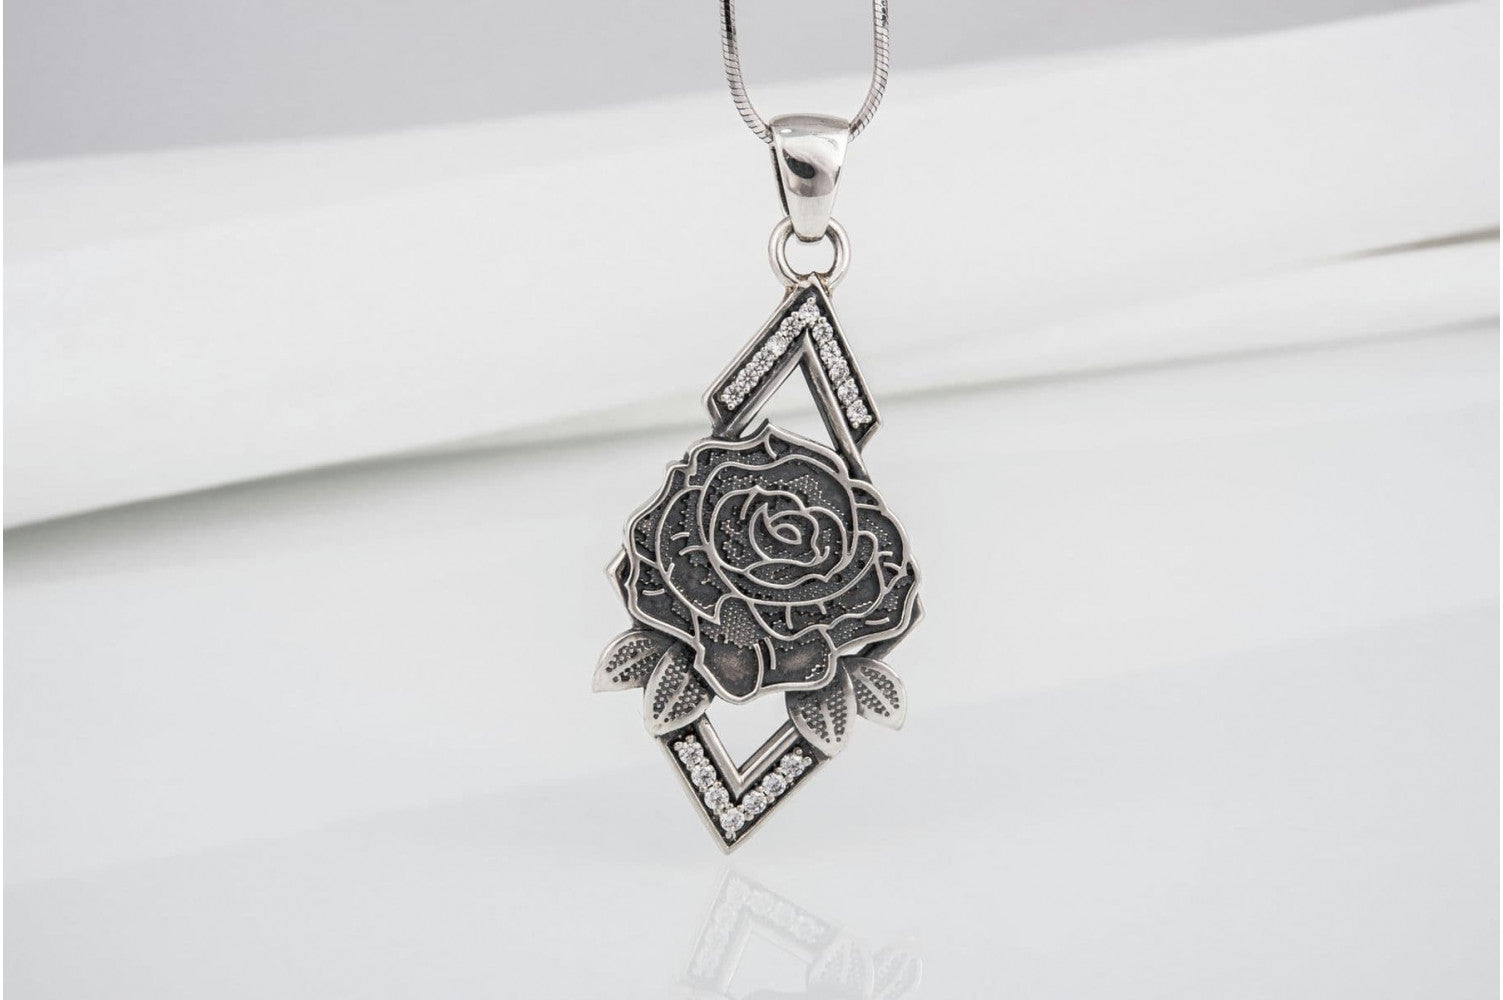 Unique onesided Rose pendant with gems, handcrafted sterling silver jewelry - vikingworkshop